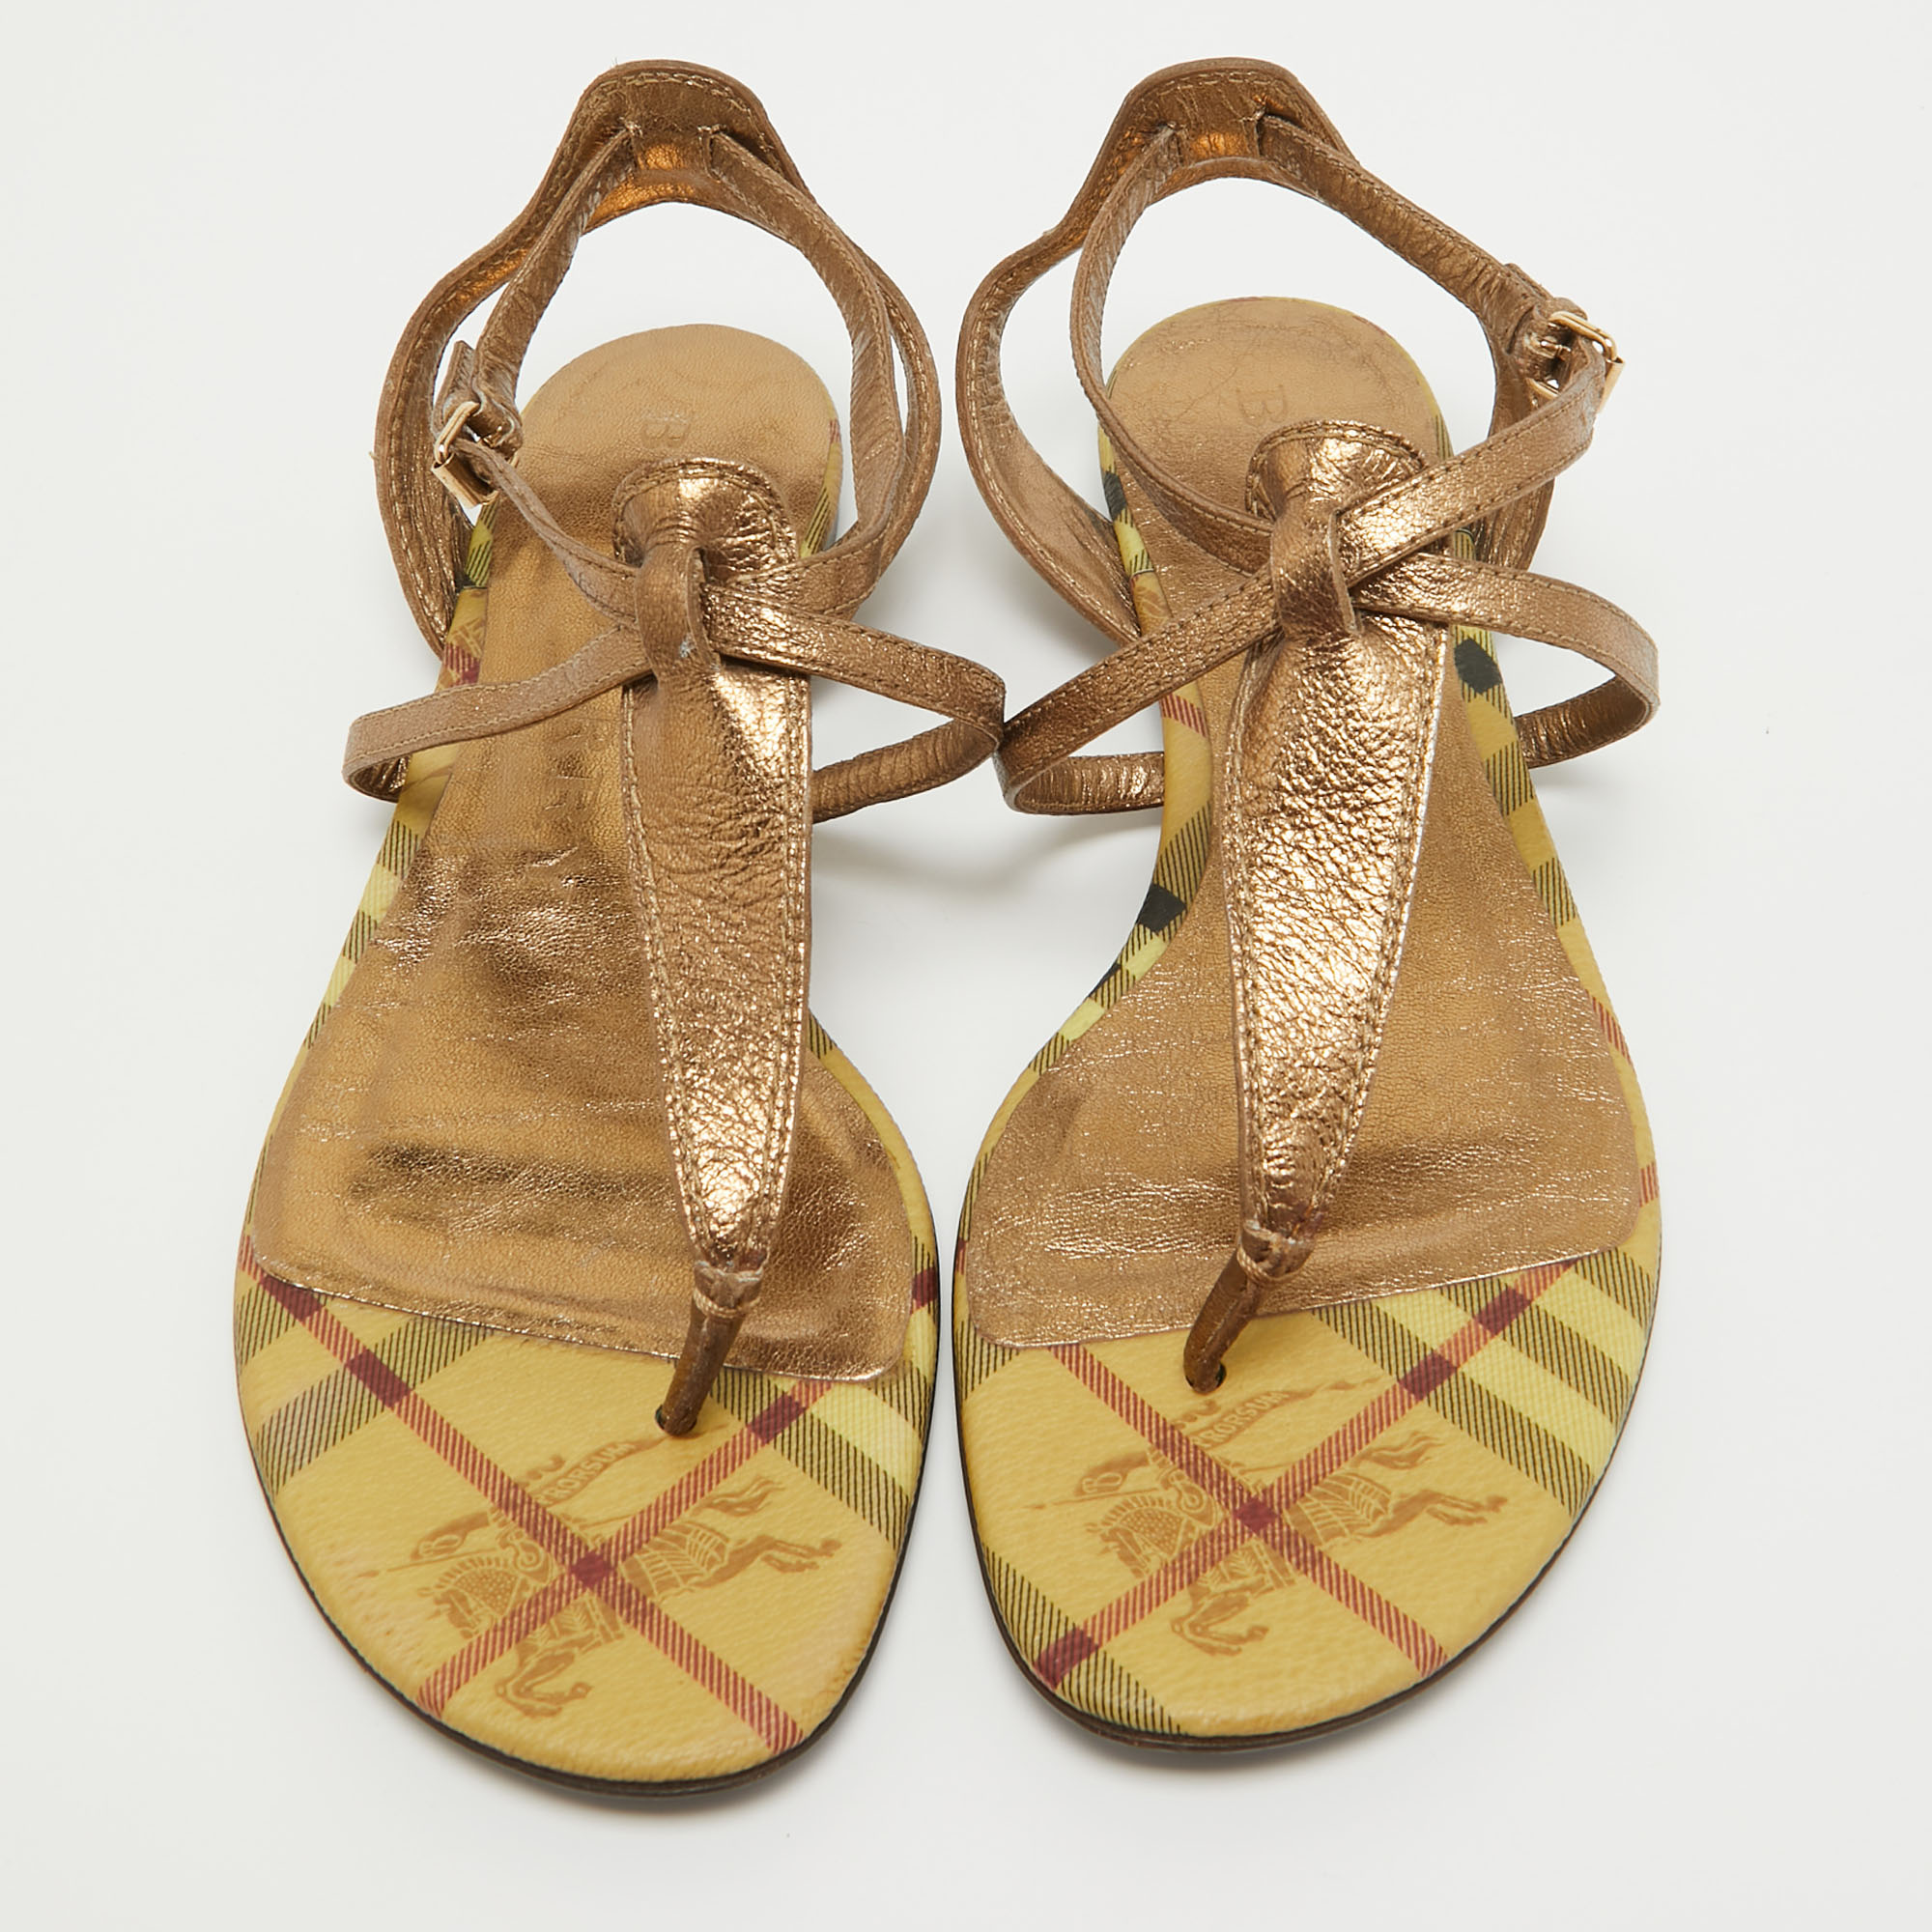 Burberry Metallic Gold Leather Thong Ankle Strap Flat Sandals Size 39